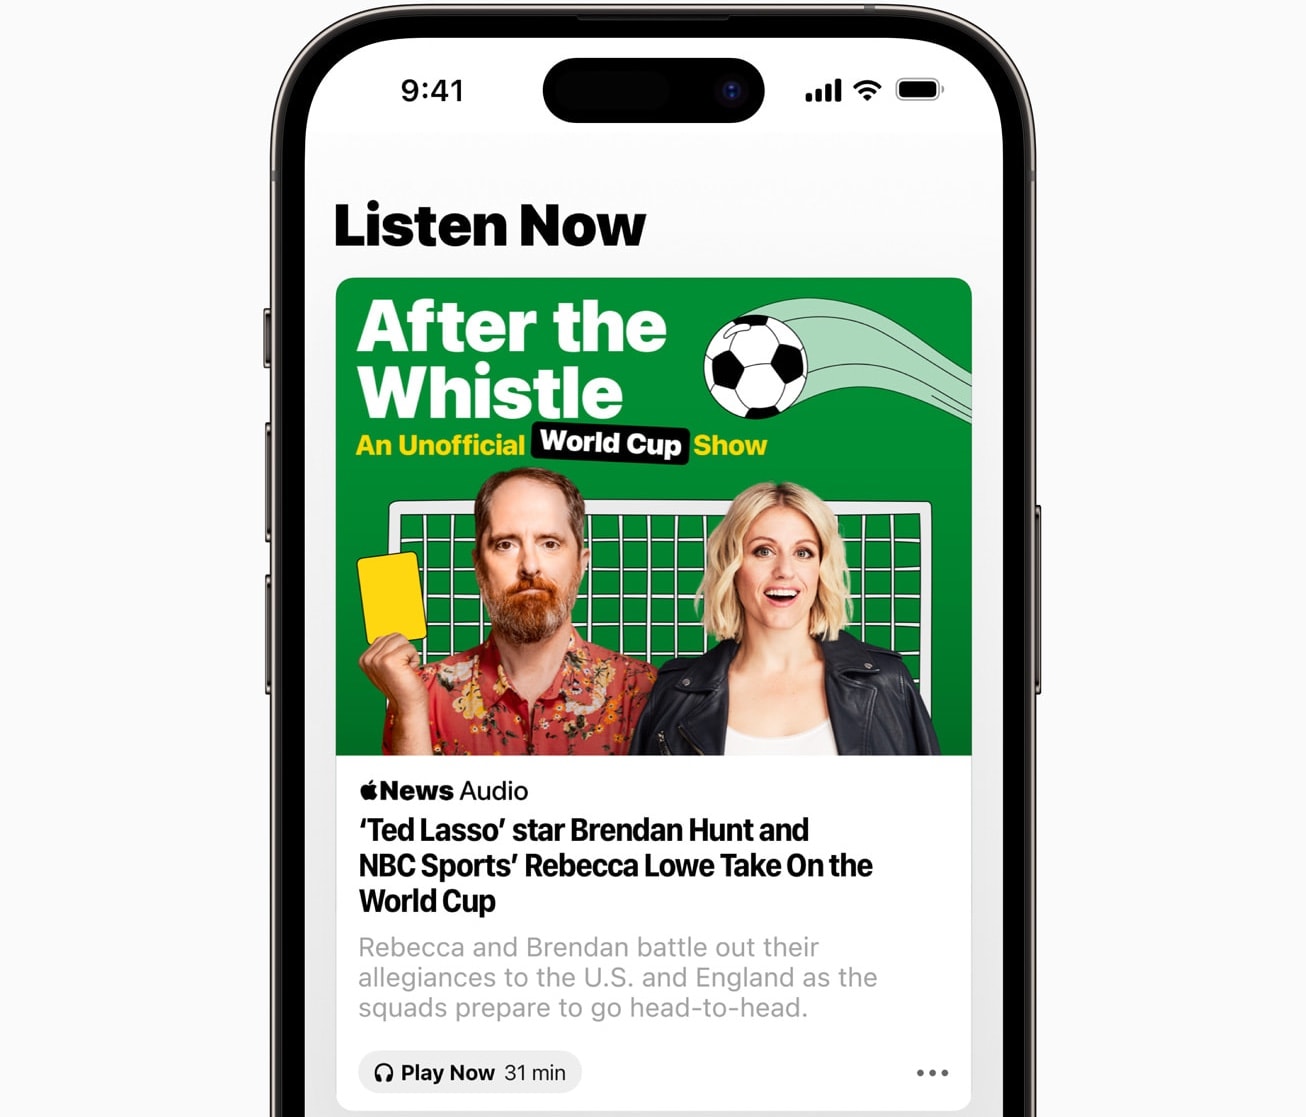 The new After the Whistle podcast covering the World Cup kicks off November 17.